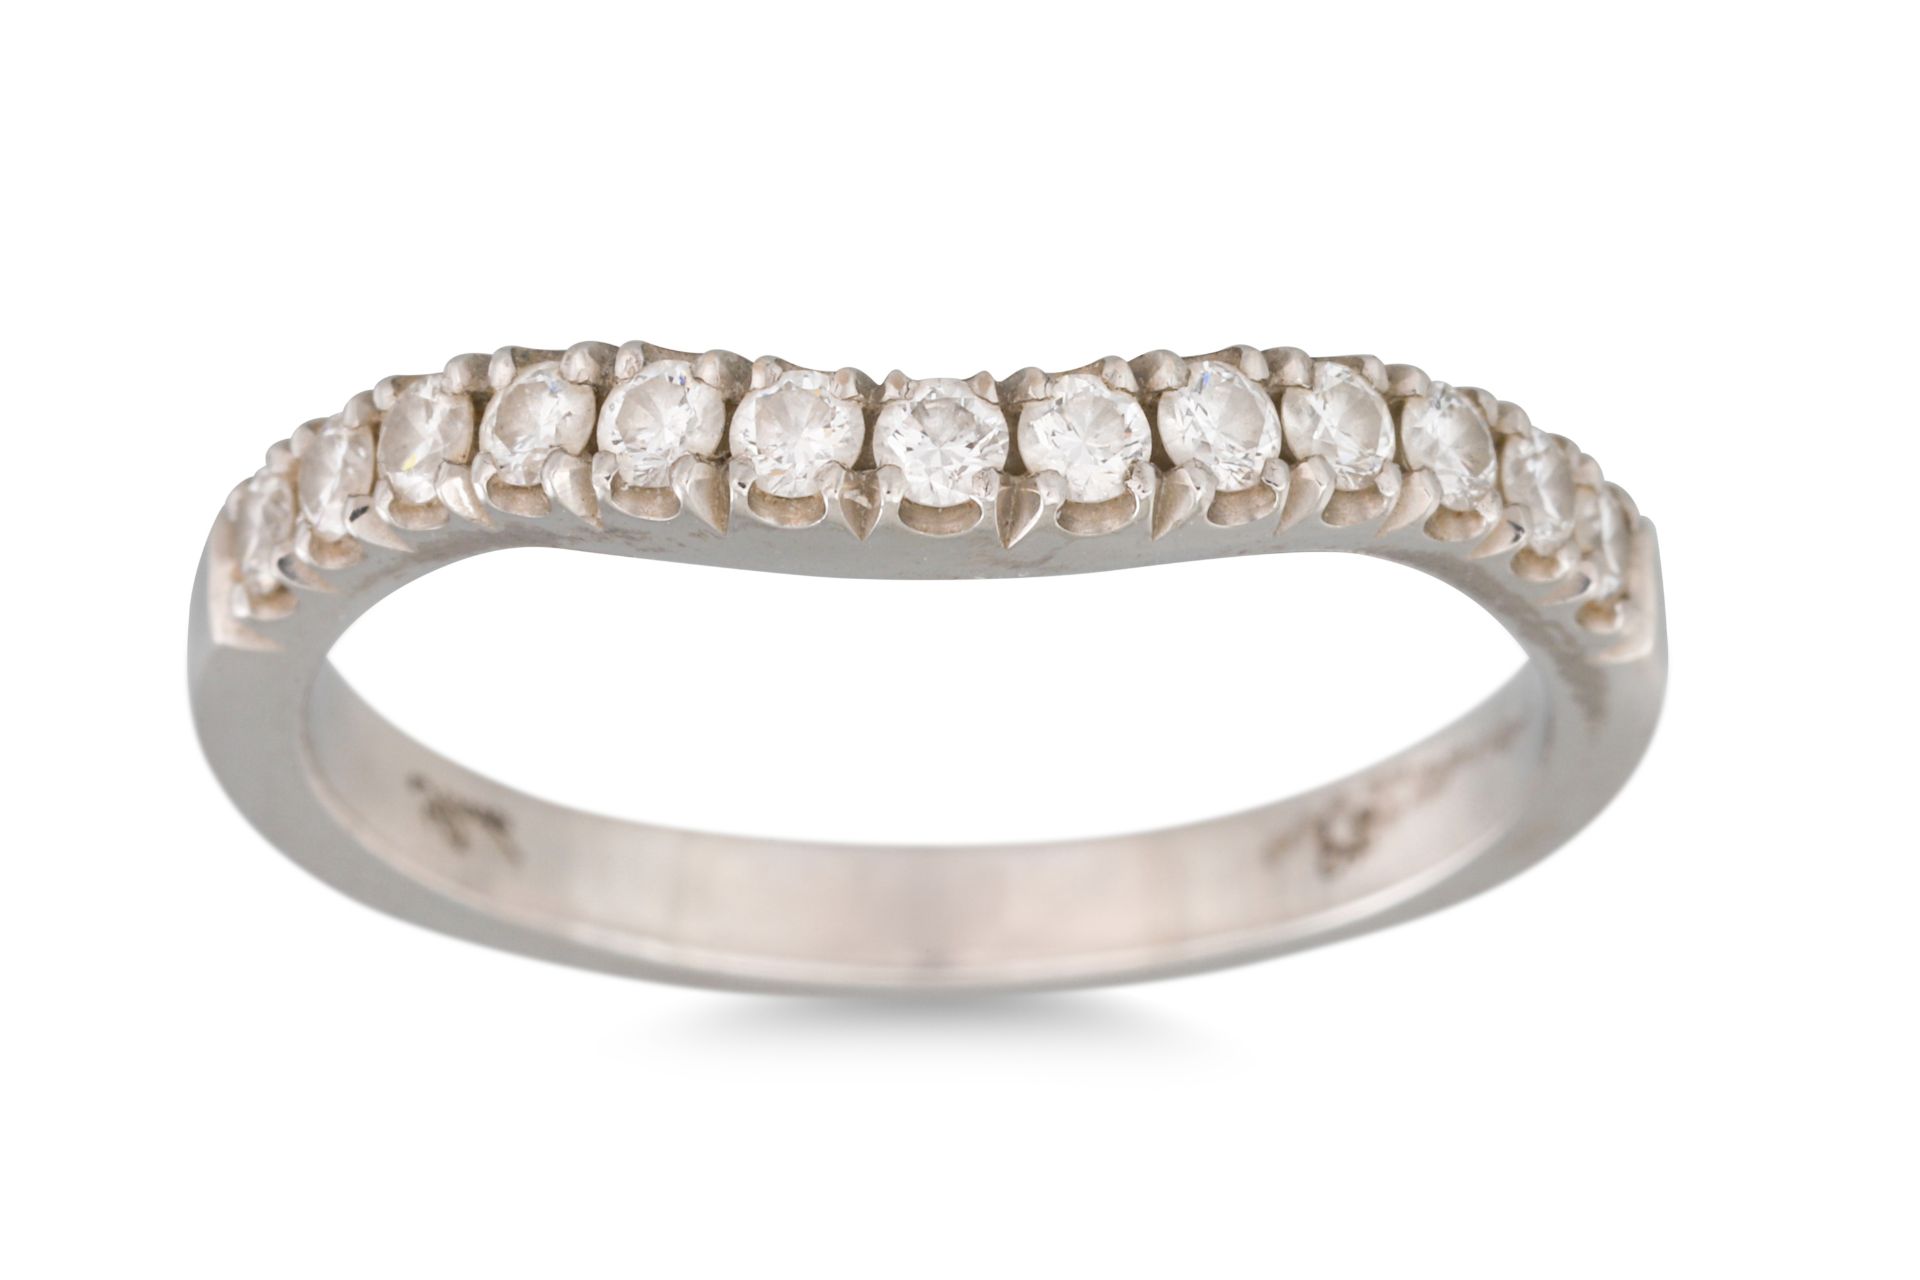 A DIAMOND SET SHAPED BAND, in platinum. Estimated: weight of diamonds: 0.35 ct., size L